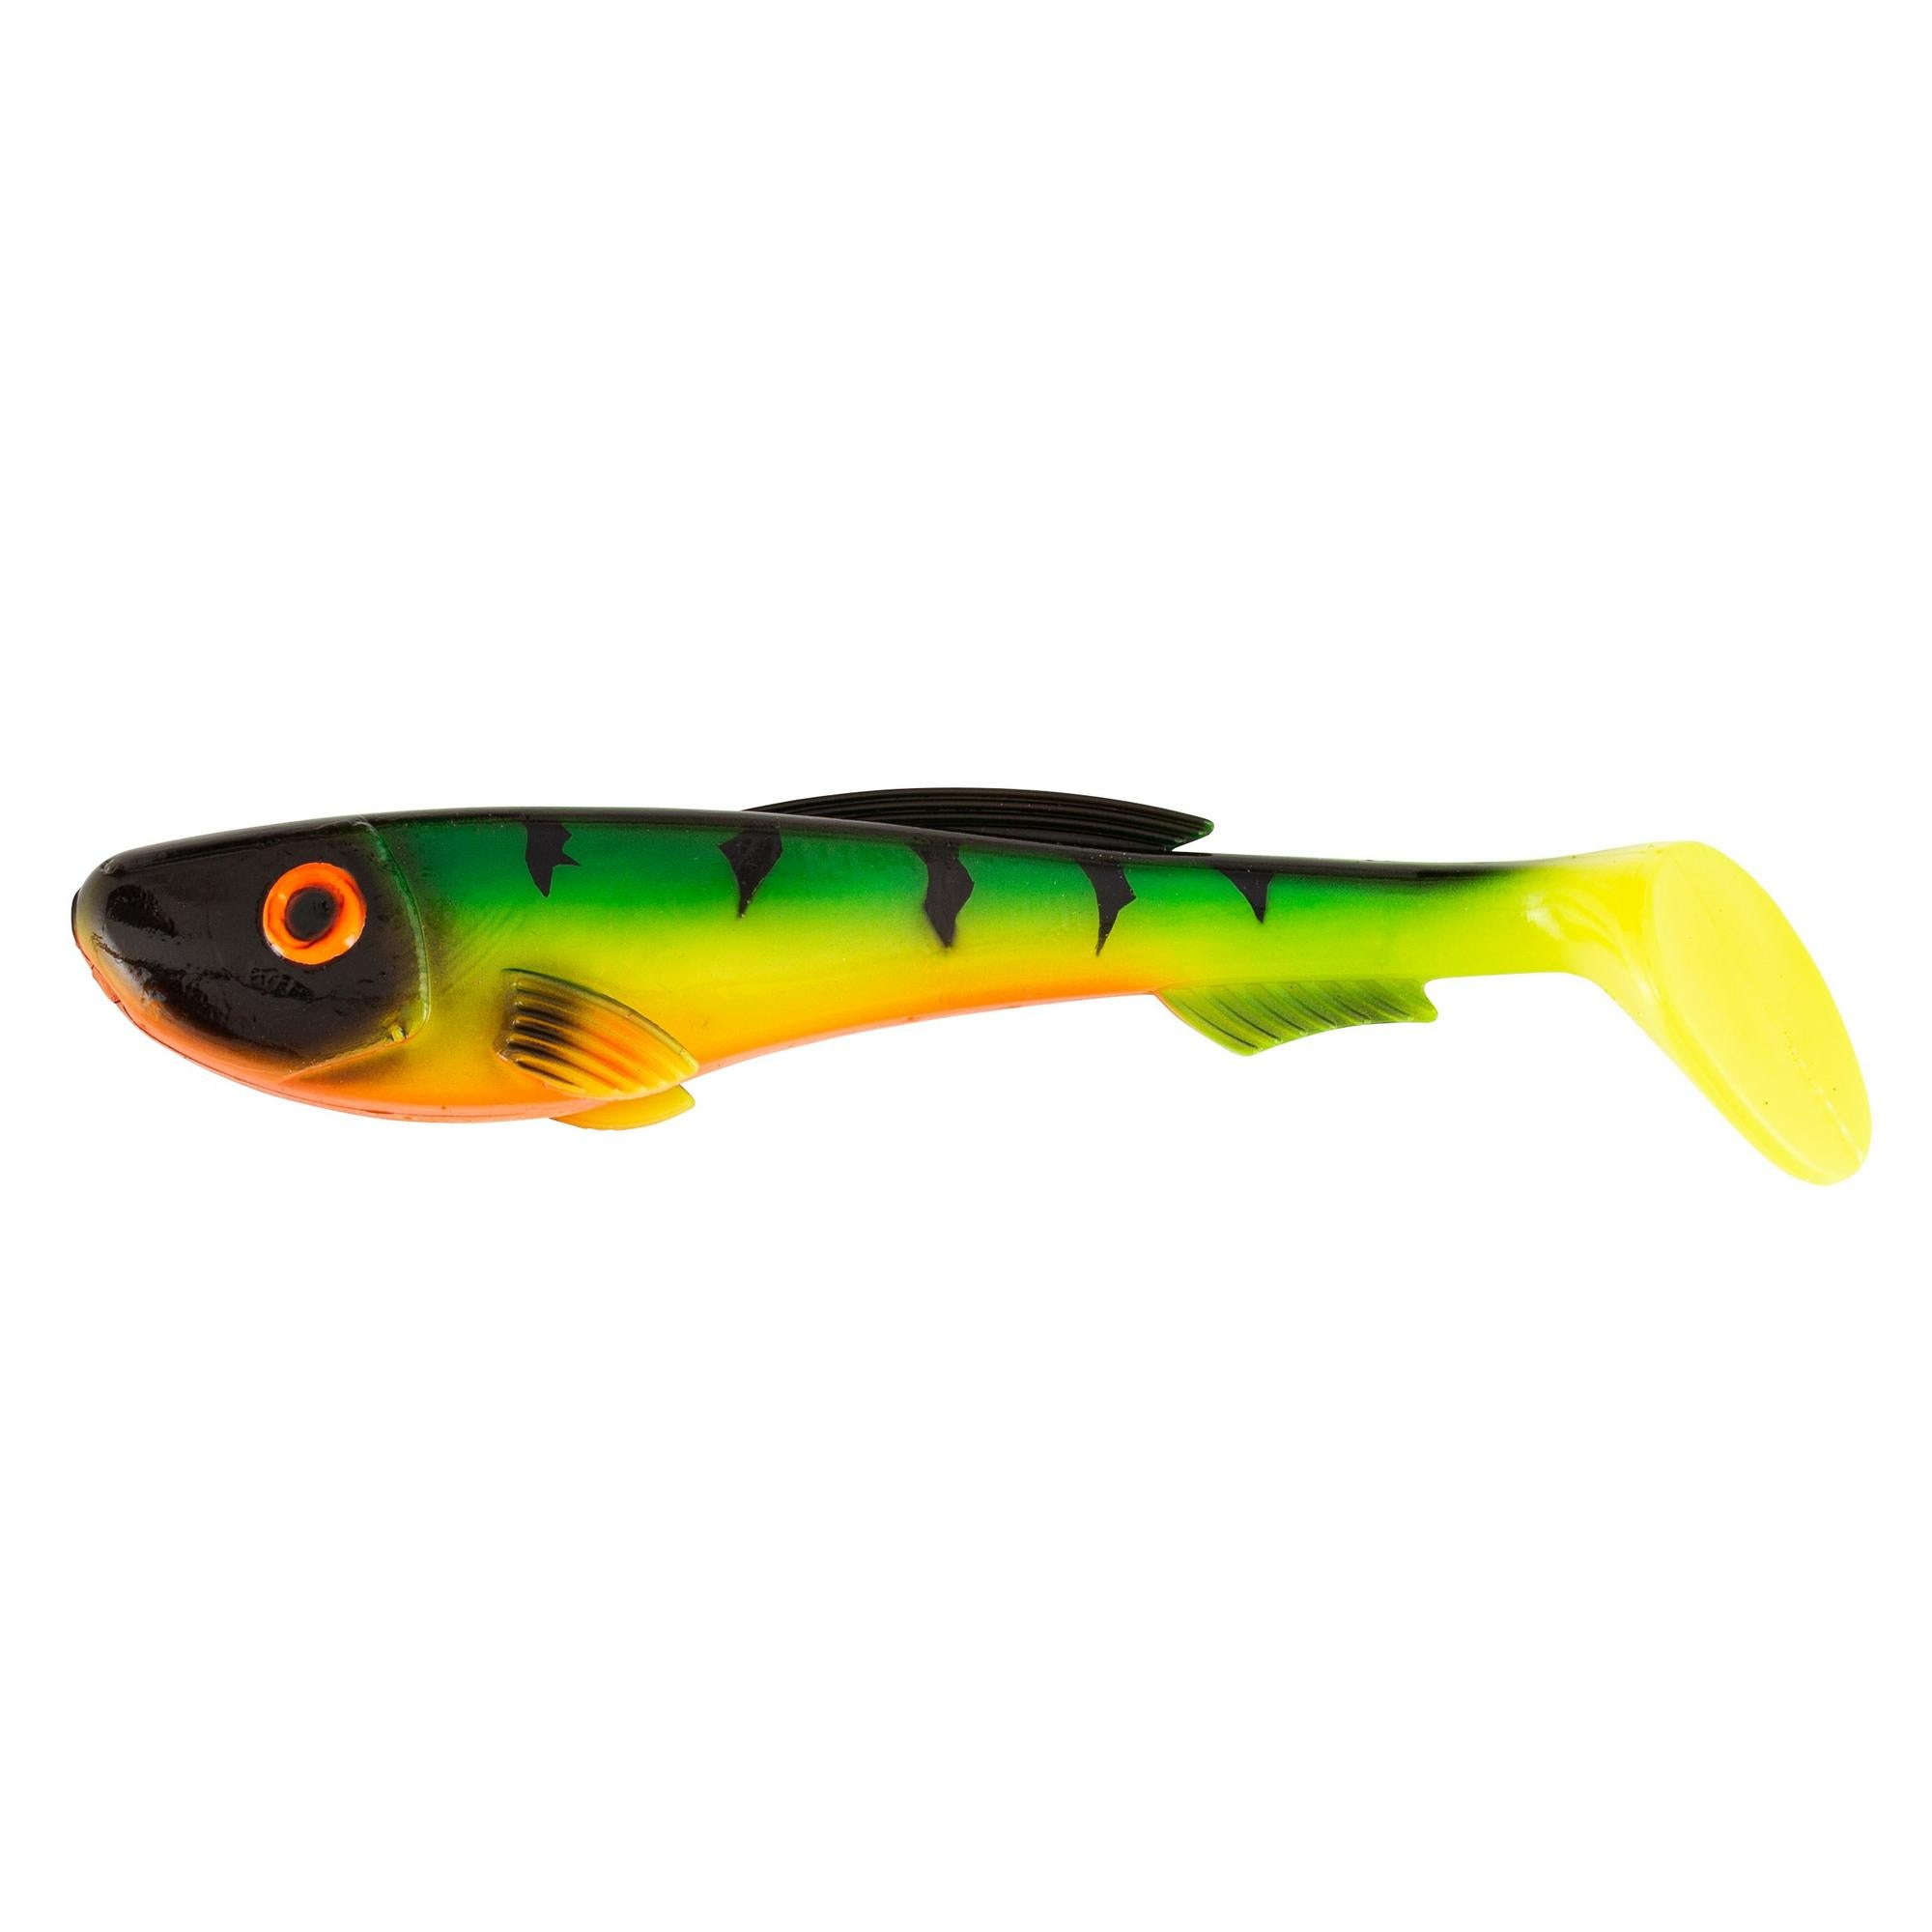 Abu Garcia - The Beast Paddle Tail is based on the proven shape of Swedish  designed swim baits with a retro-cool twist. The lure's large paddle tail  gives it a very steady